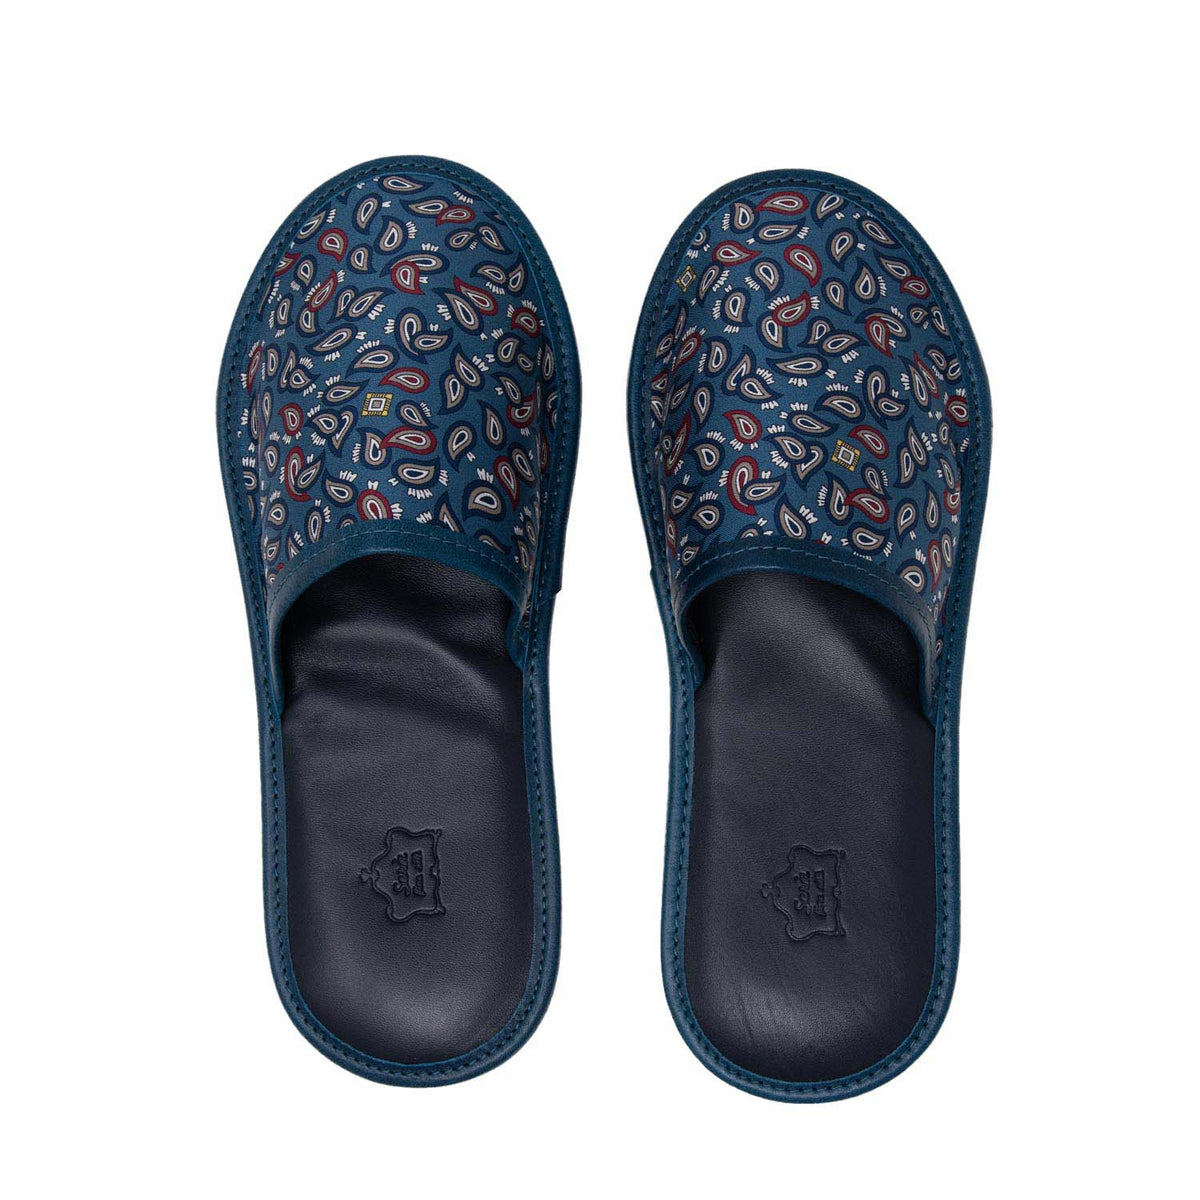 serà fine silk - Dust Blue with Small Paisley Silk & Leather Slippers